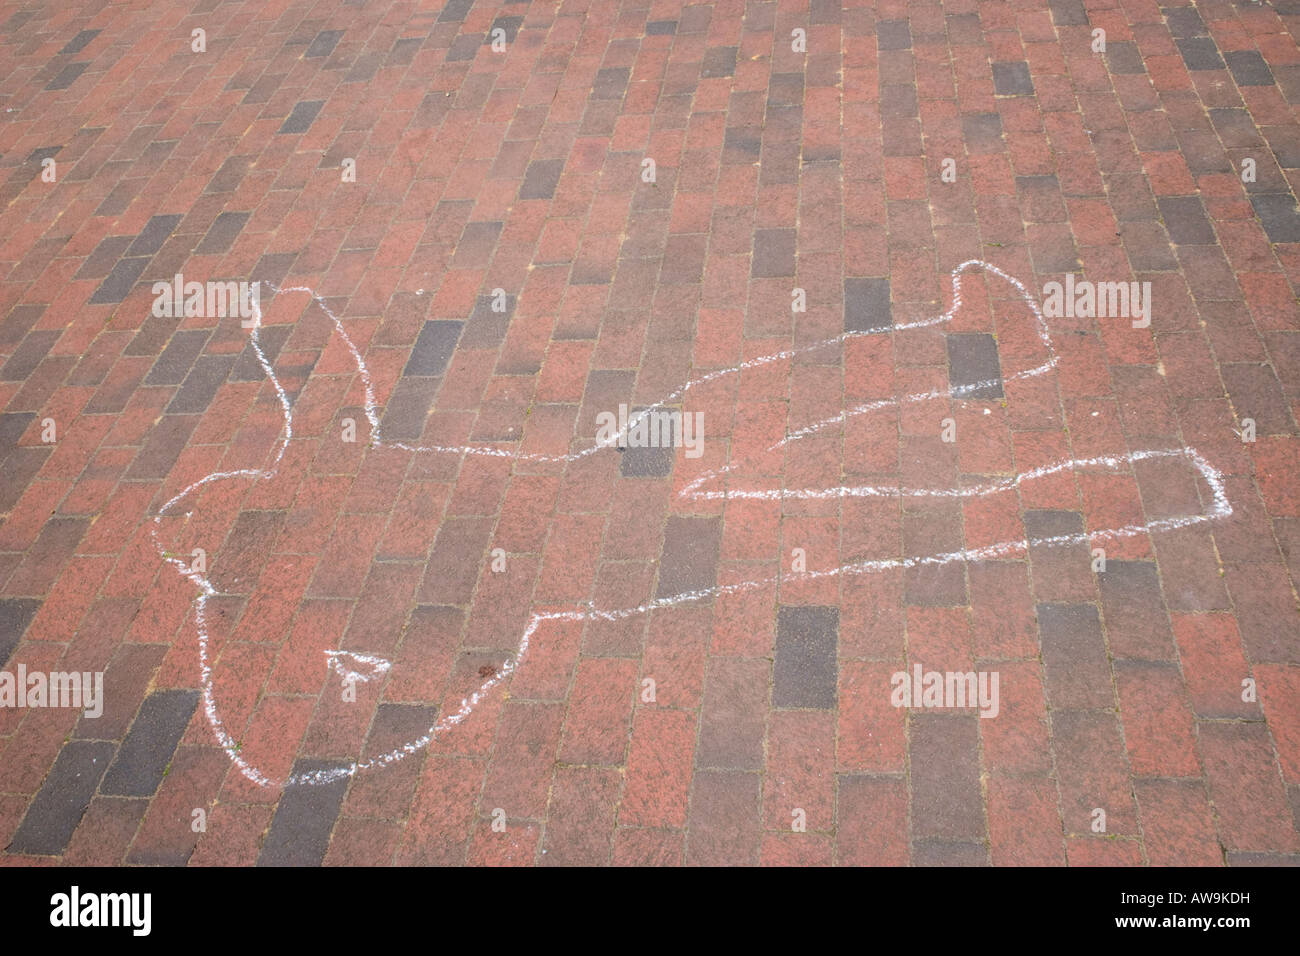 Chalk outline of a body on the pavement Stock Photo